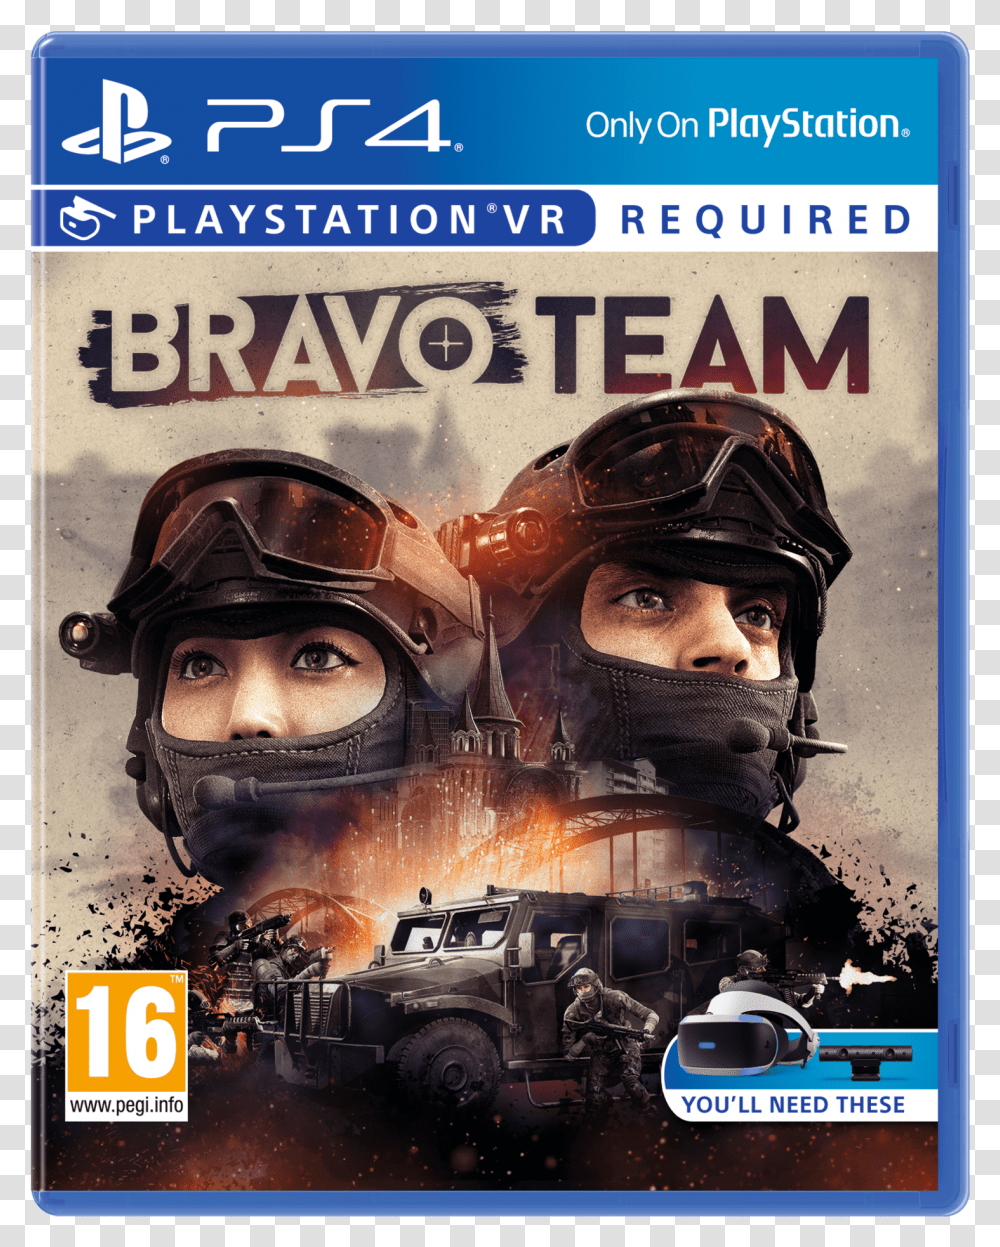 With Arm Controller Ps4 Vr Bravo Team Transparent Png